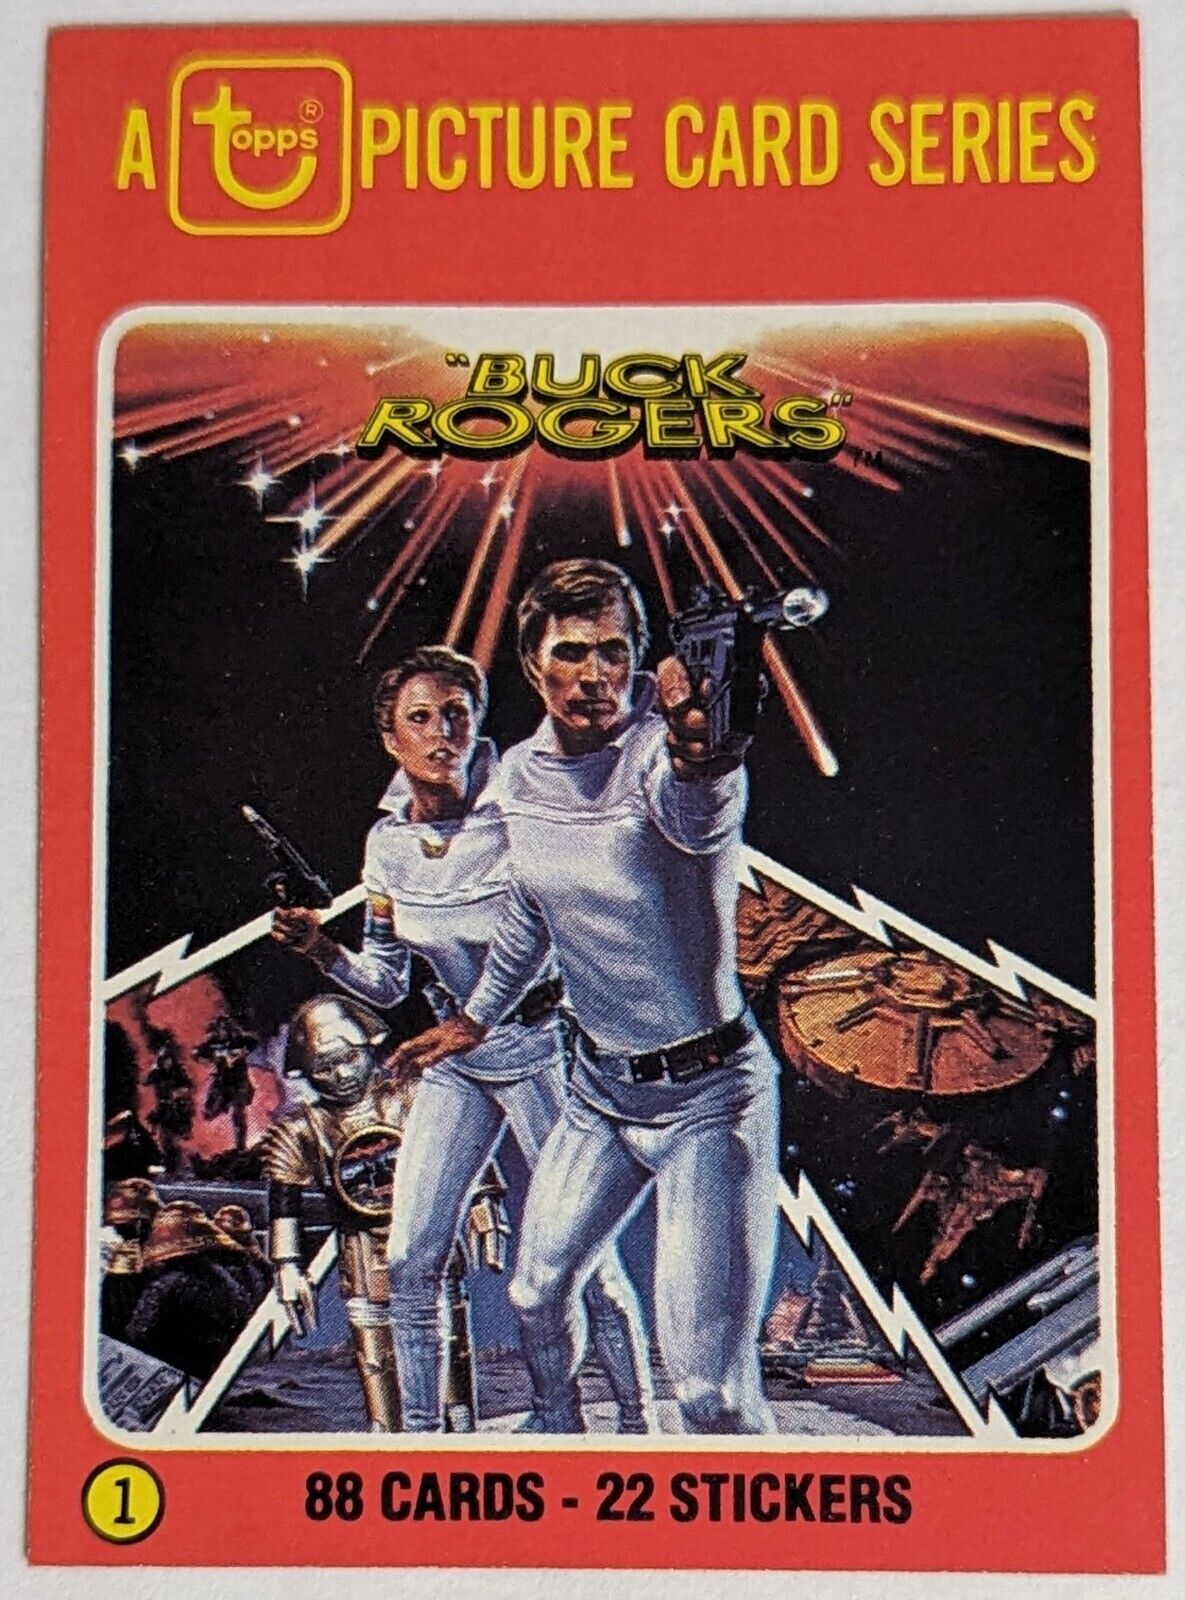 1979 Topps BUCK ROGERS Complete 88 Card Set & 22 Stickers + 1 Wax Pack Wrapper